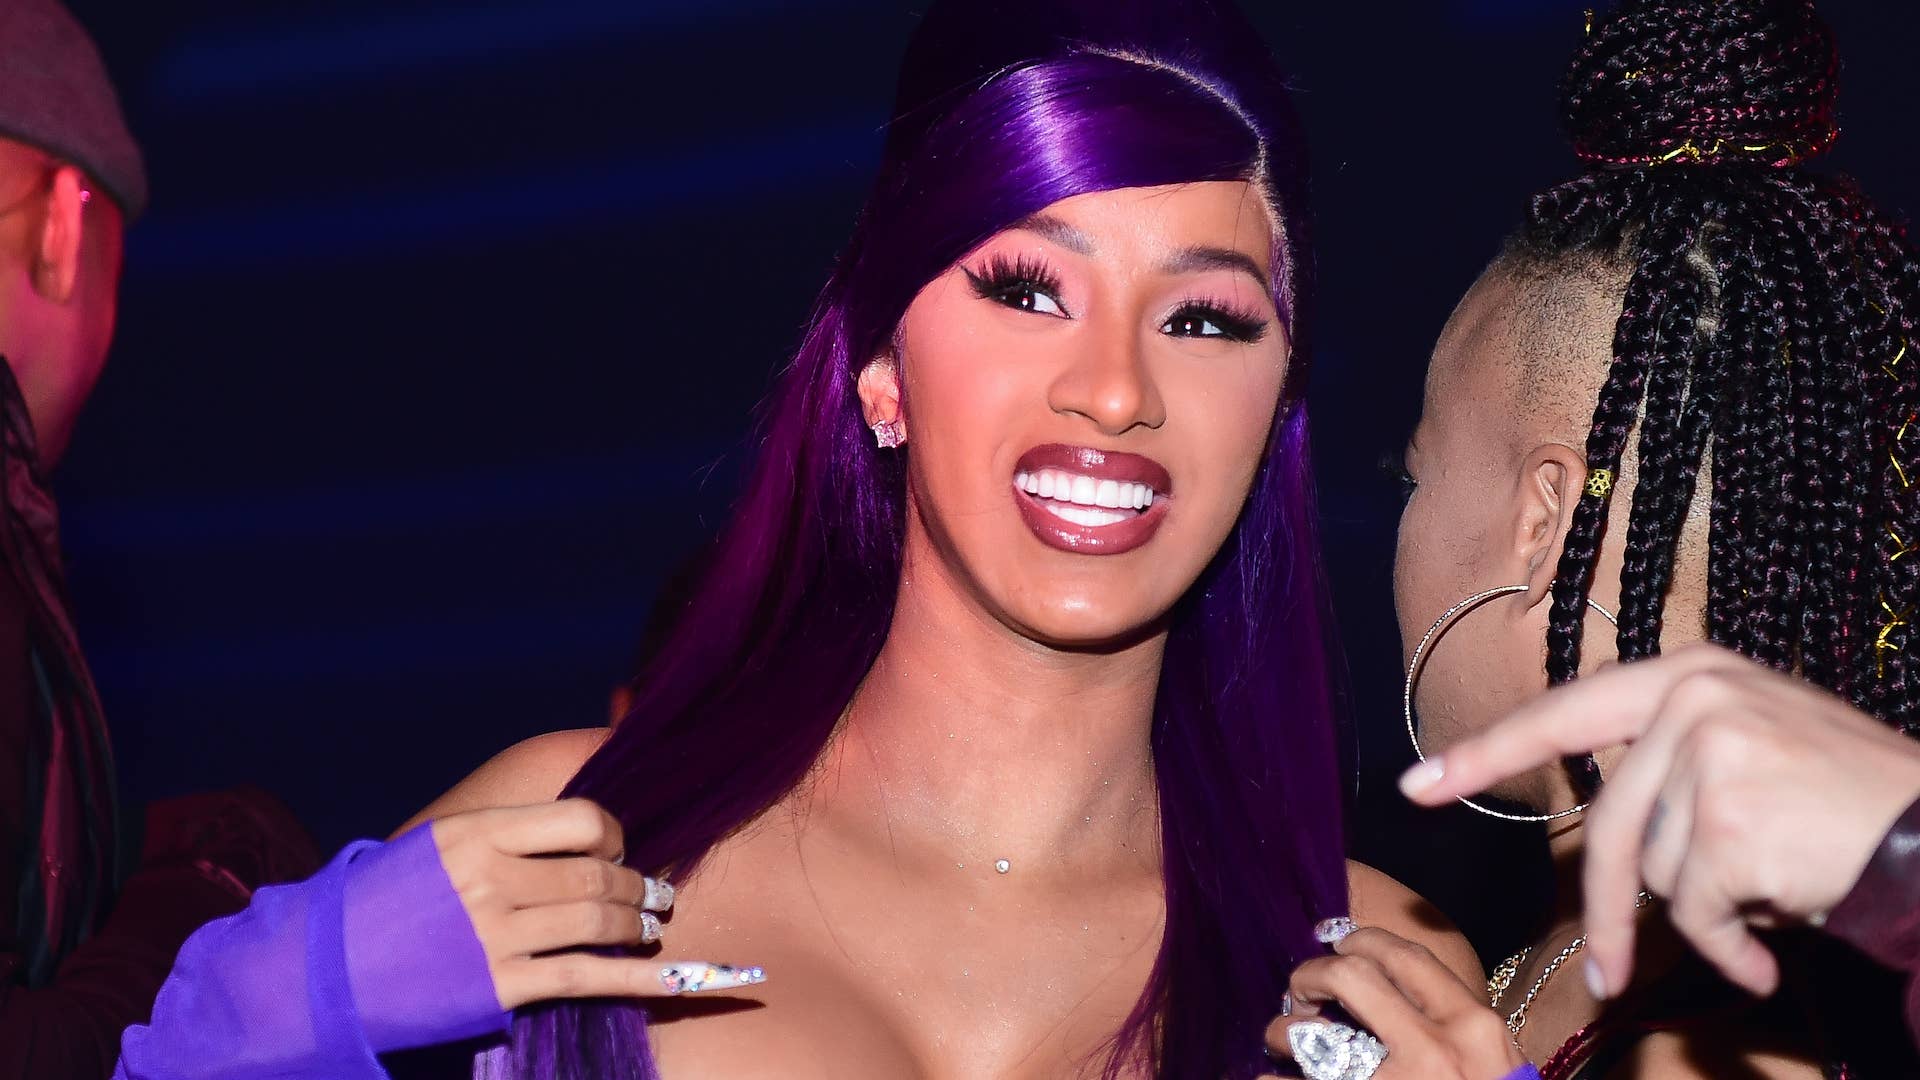 Cardi B attends The Big Game Weekend at The Dome Miami on February 2, 2020 in Miami, Florida.